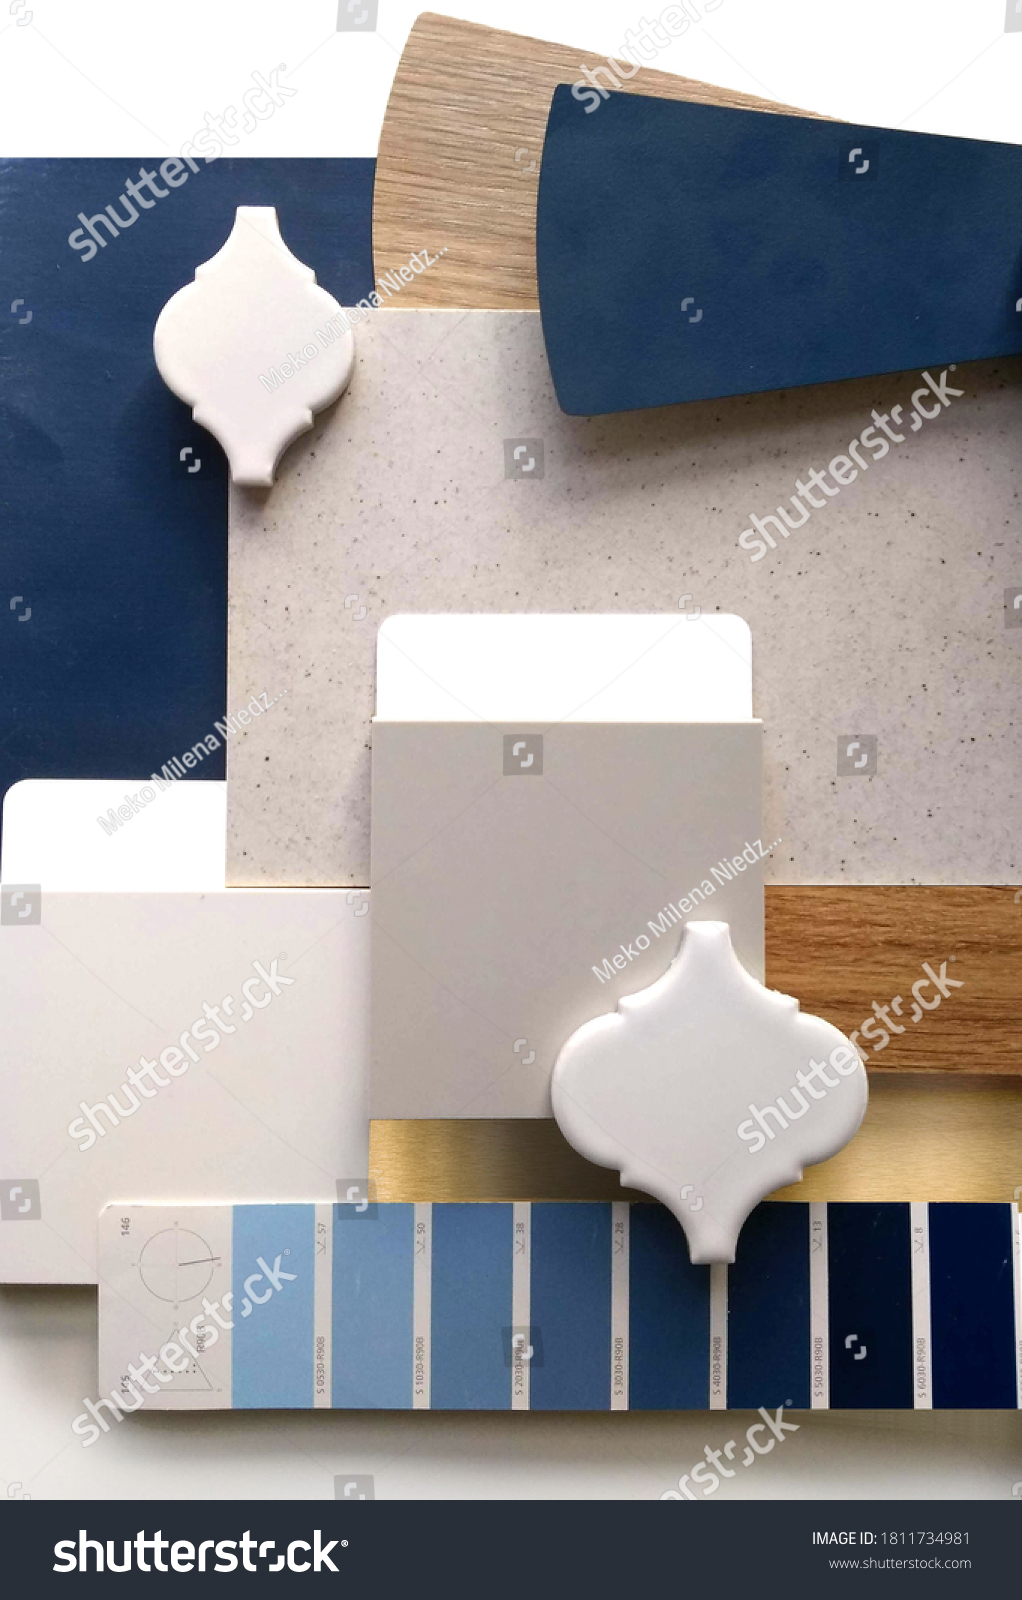 
Moodboard. Material samples. Blue, gray, white, warm wood. #1811734981